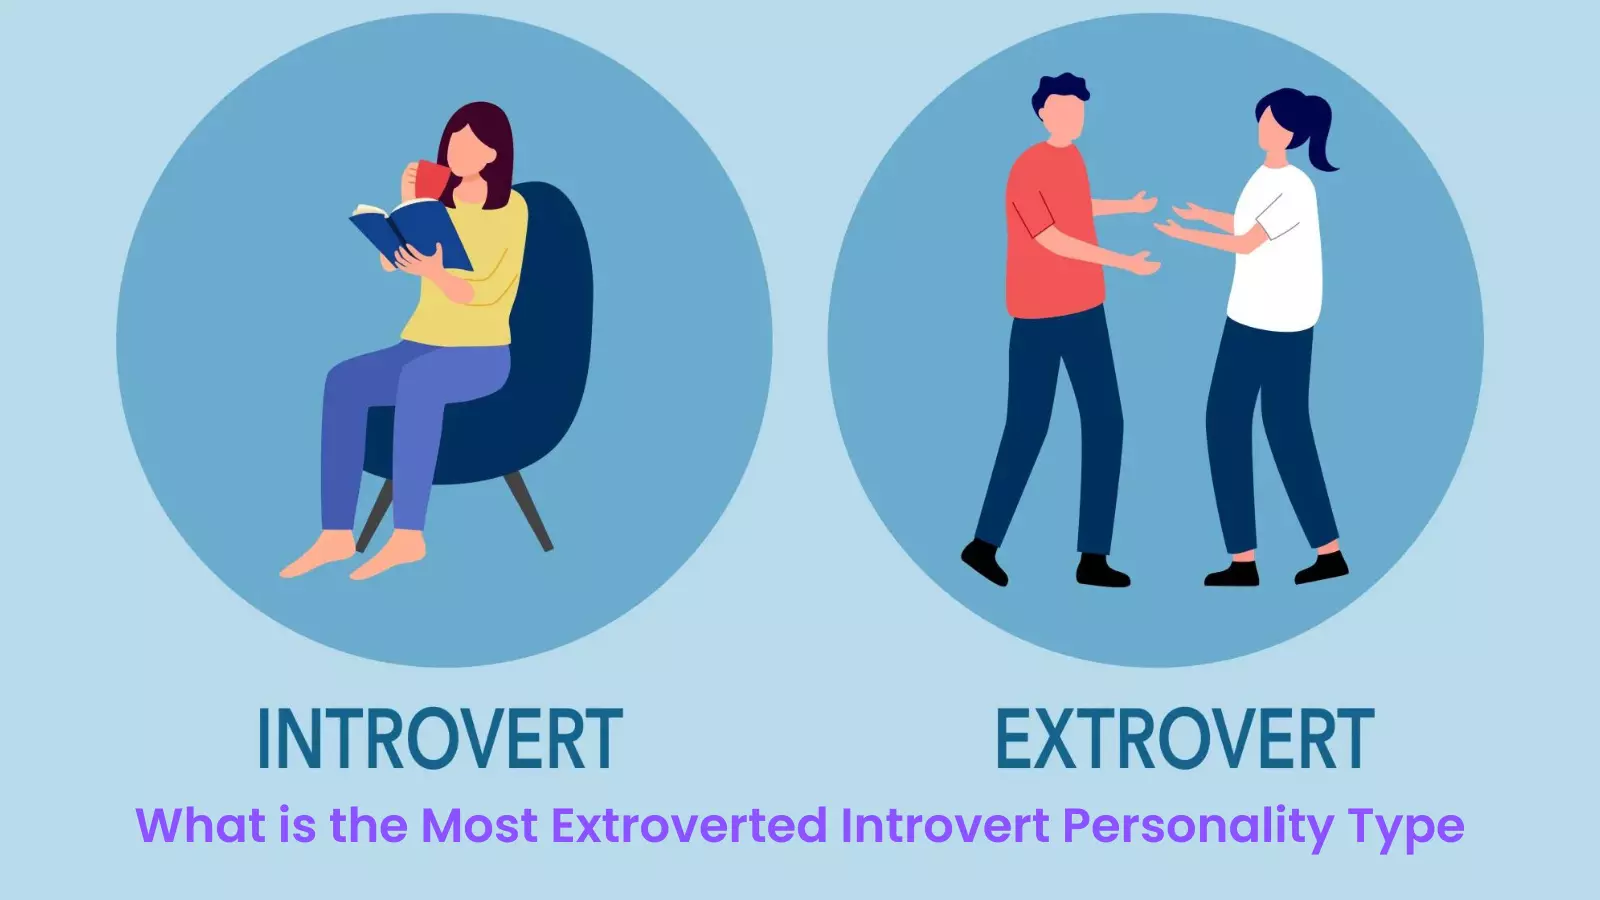 What is the Most Extroverted Introvert Personality Type